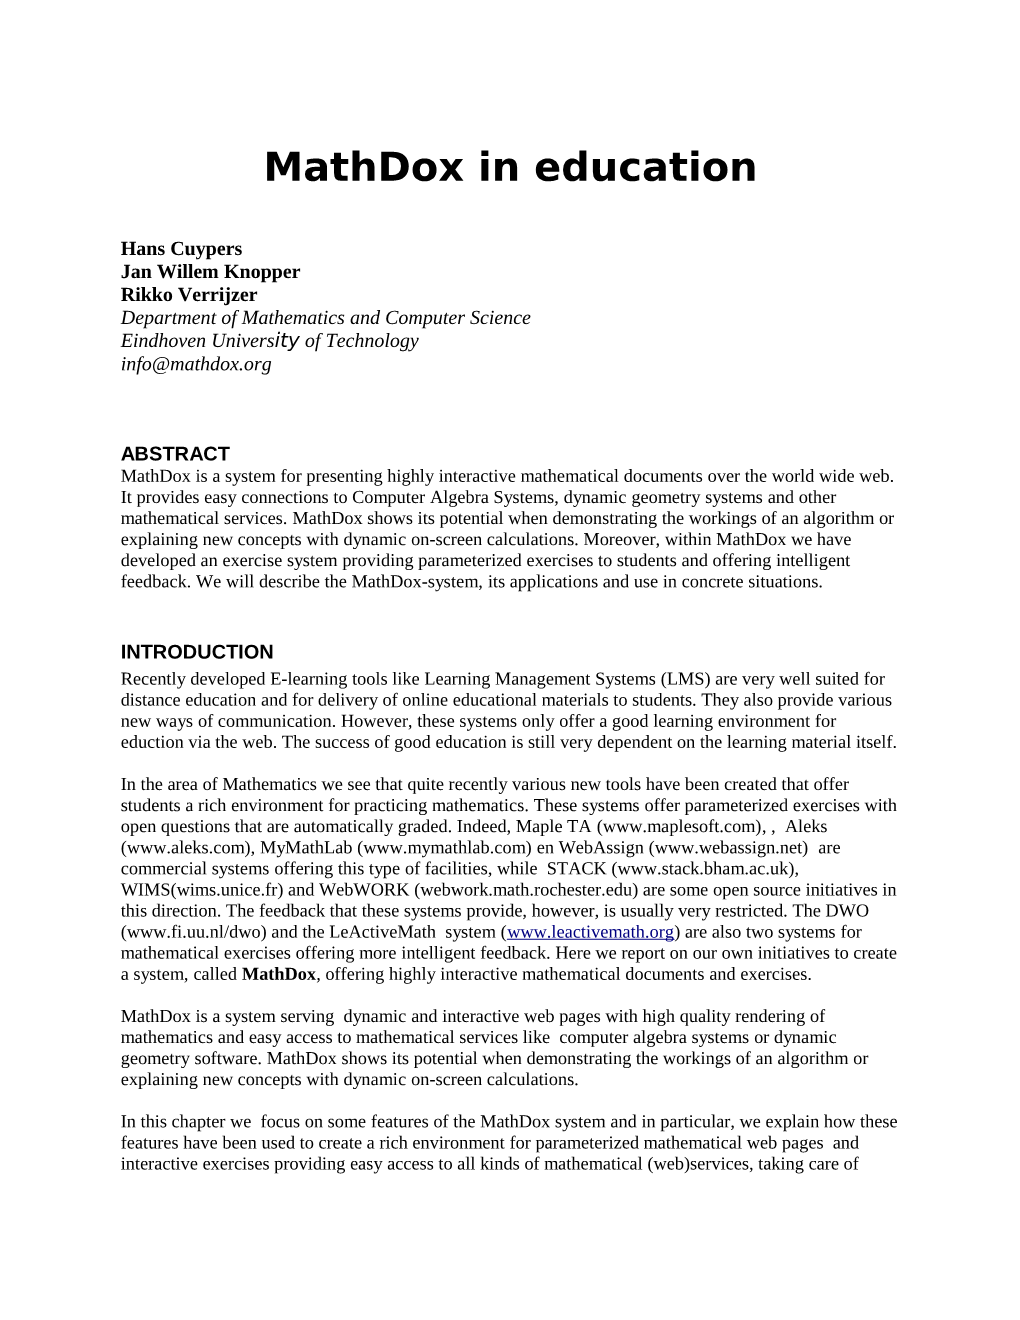 Mathdox in Education